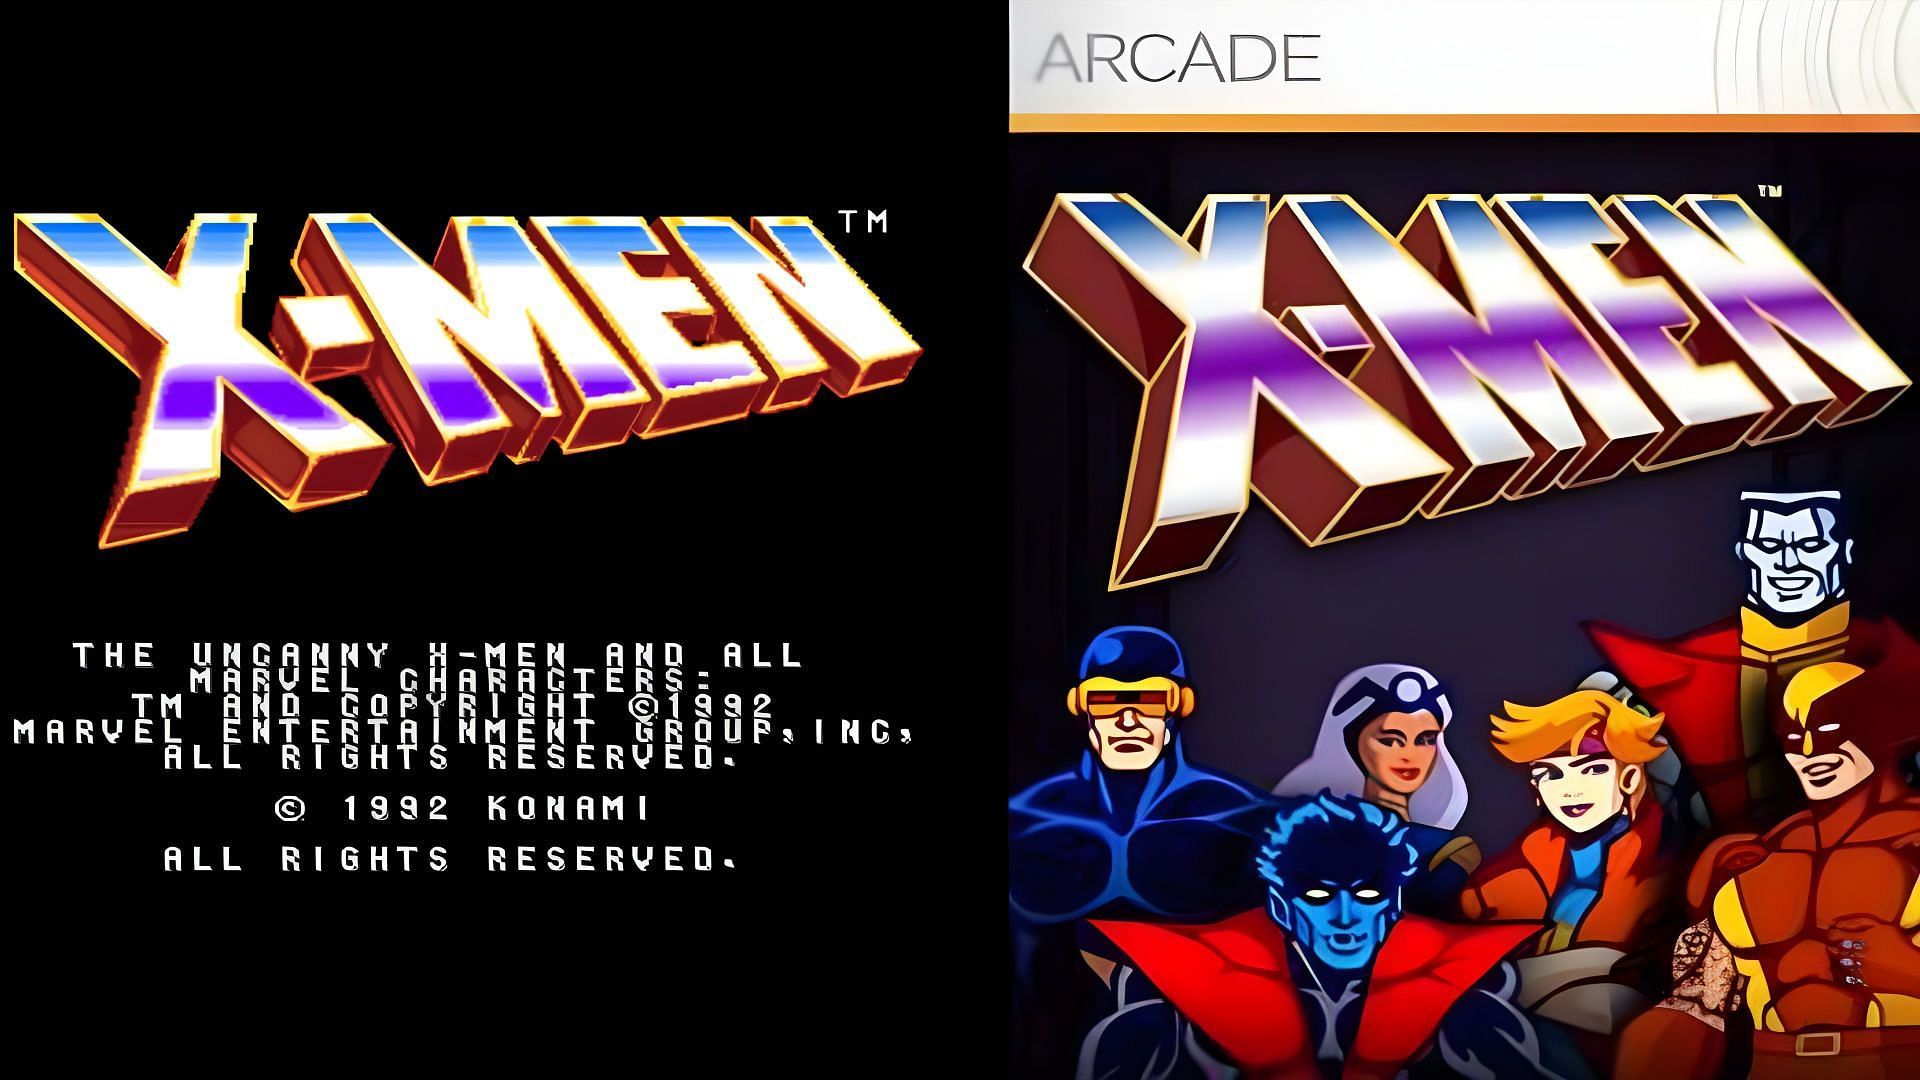 X-Men (Arcade) will remind you of the old days (Image via Konami)